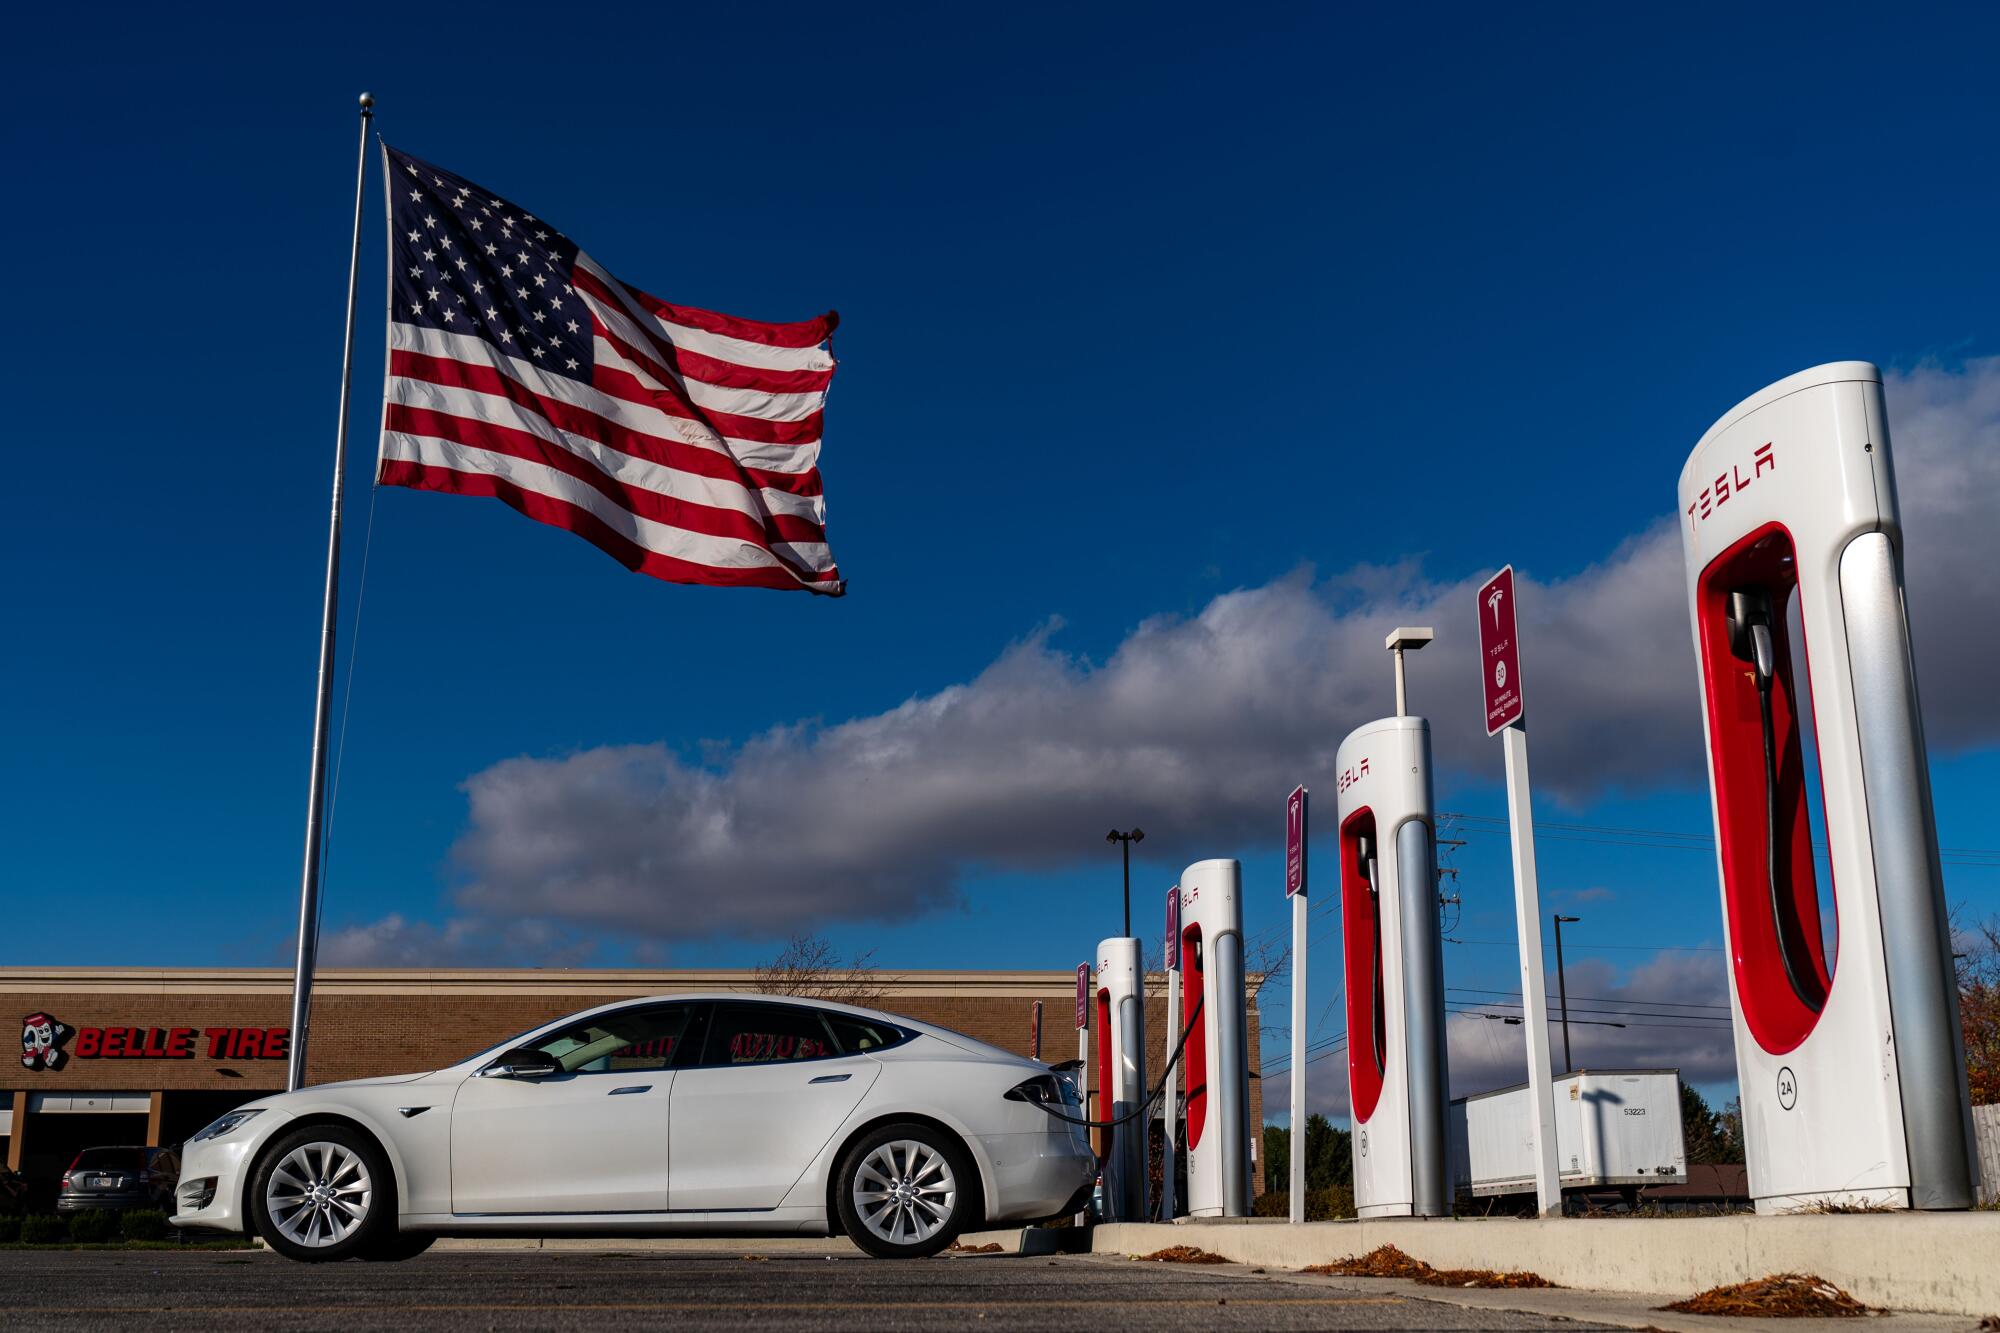 Kentucky is the first state to mandate Tesla's charging plug